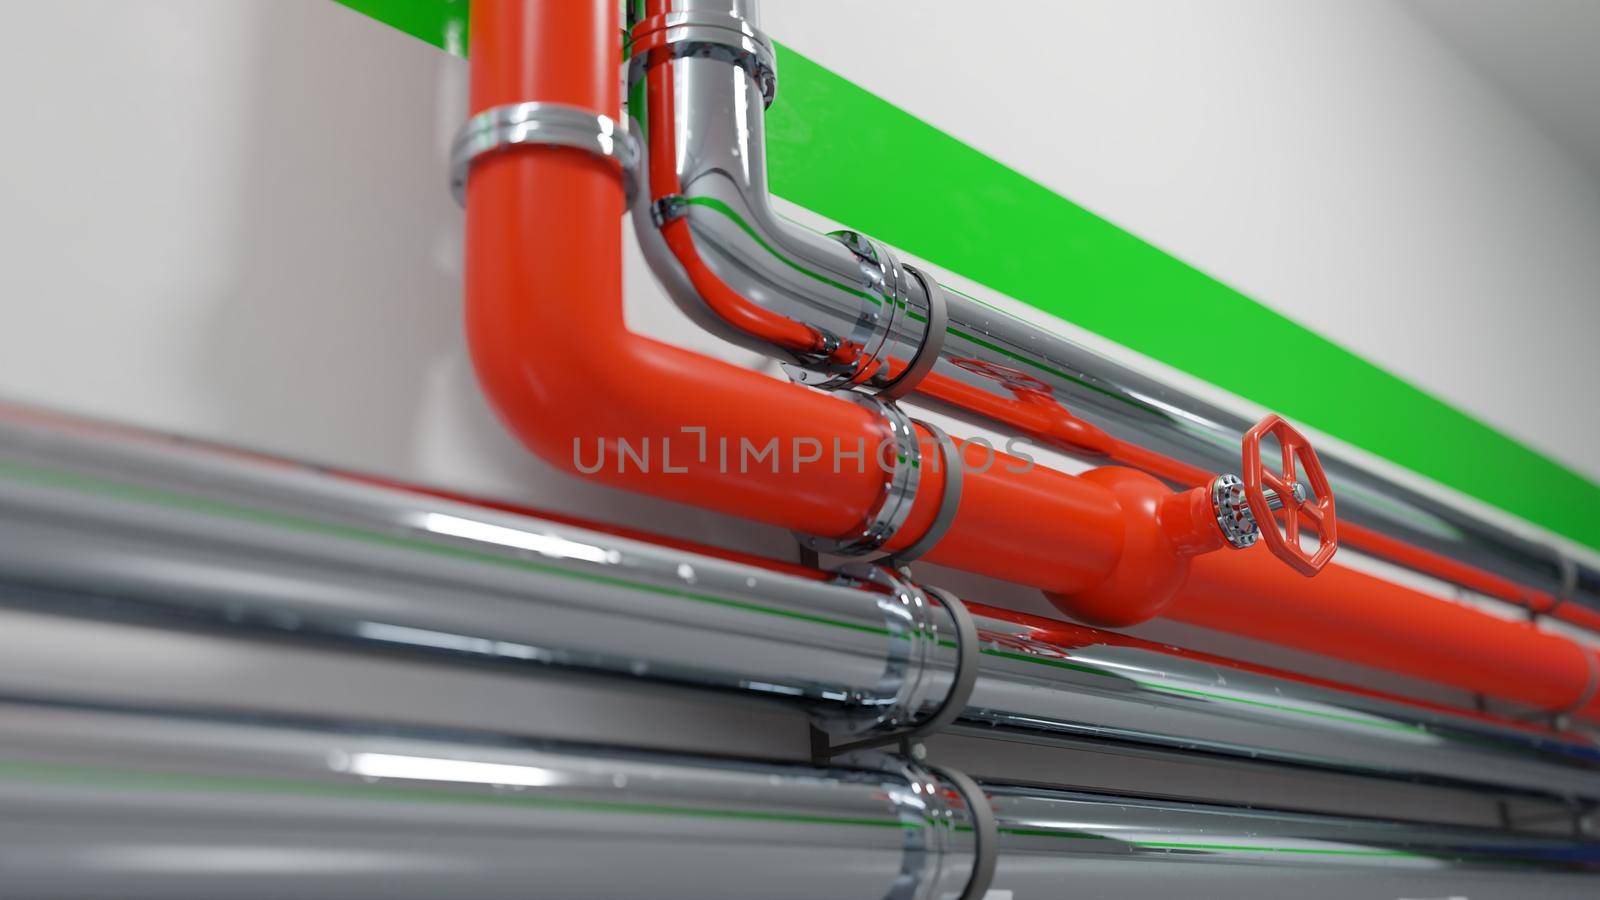 Red and metallic pipelines across a white wall with green accent line. Clean, modern industrial background. Digital render.